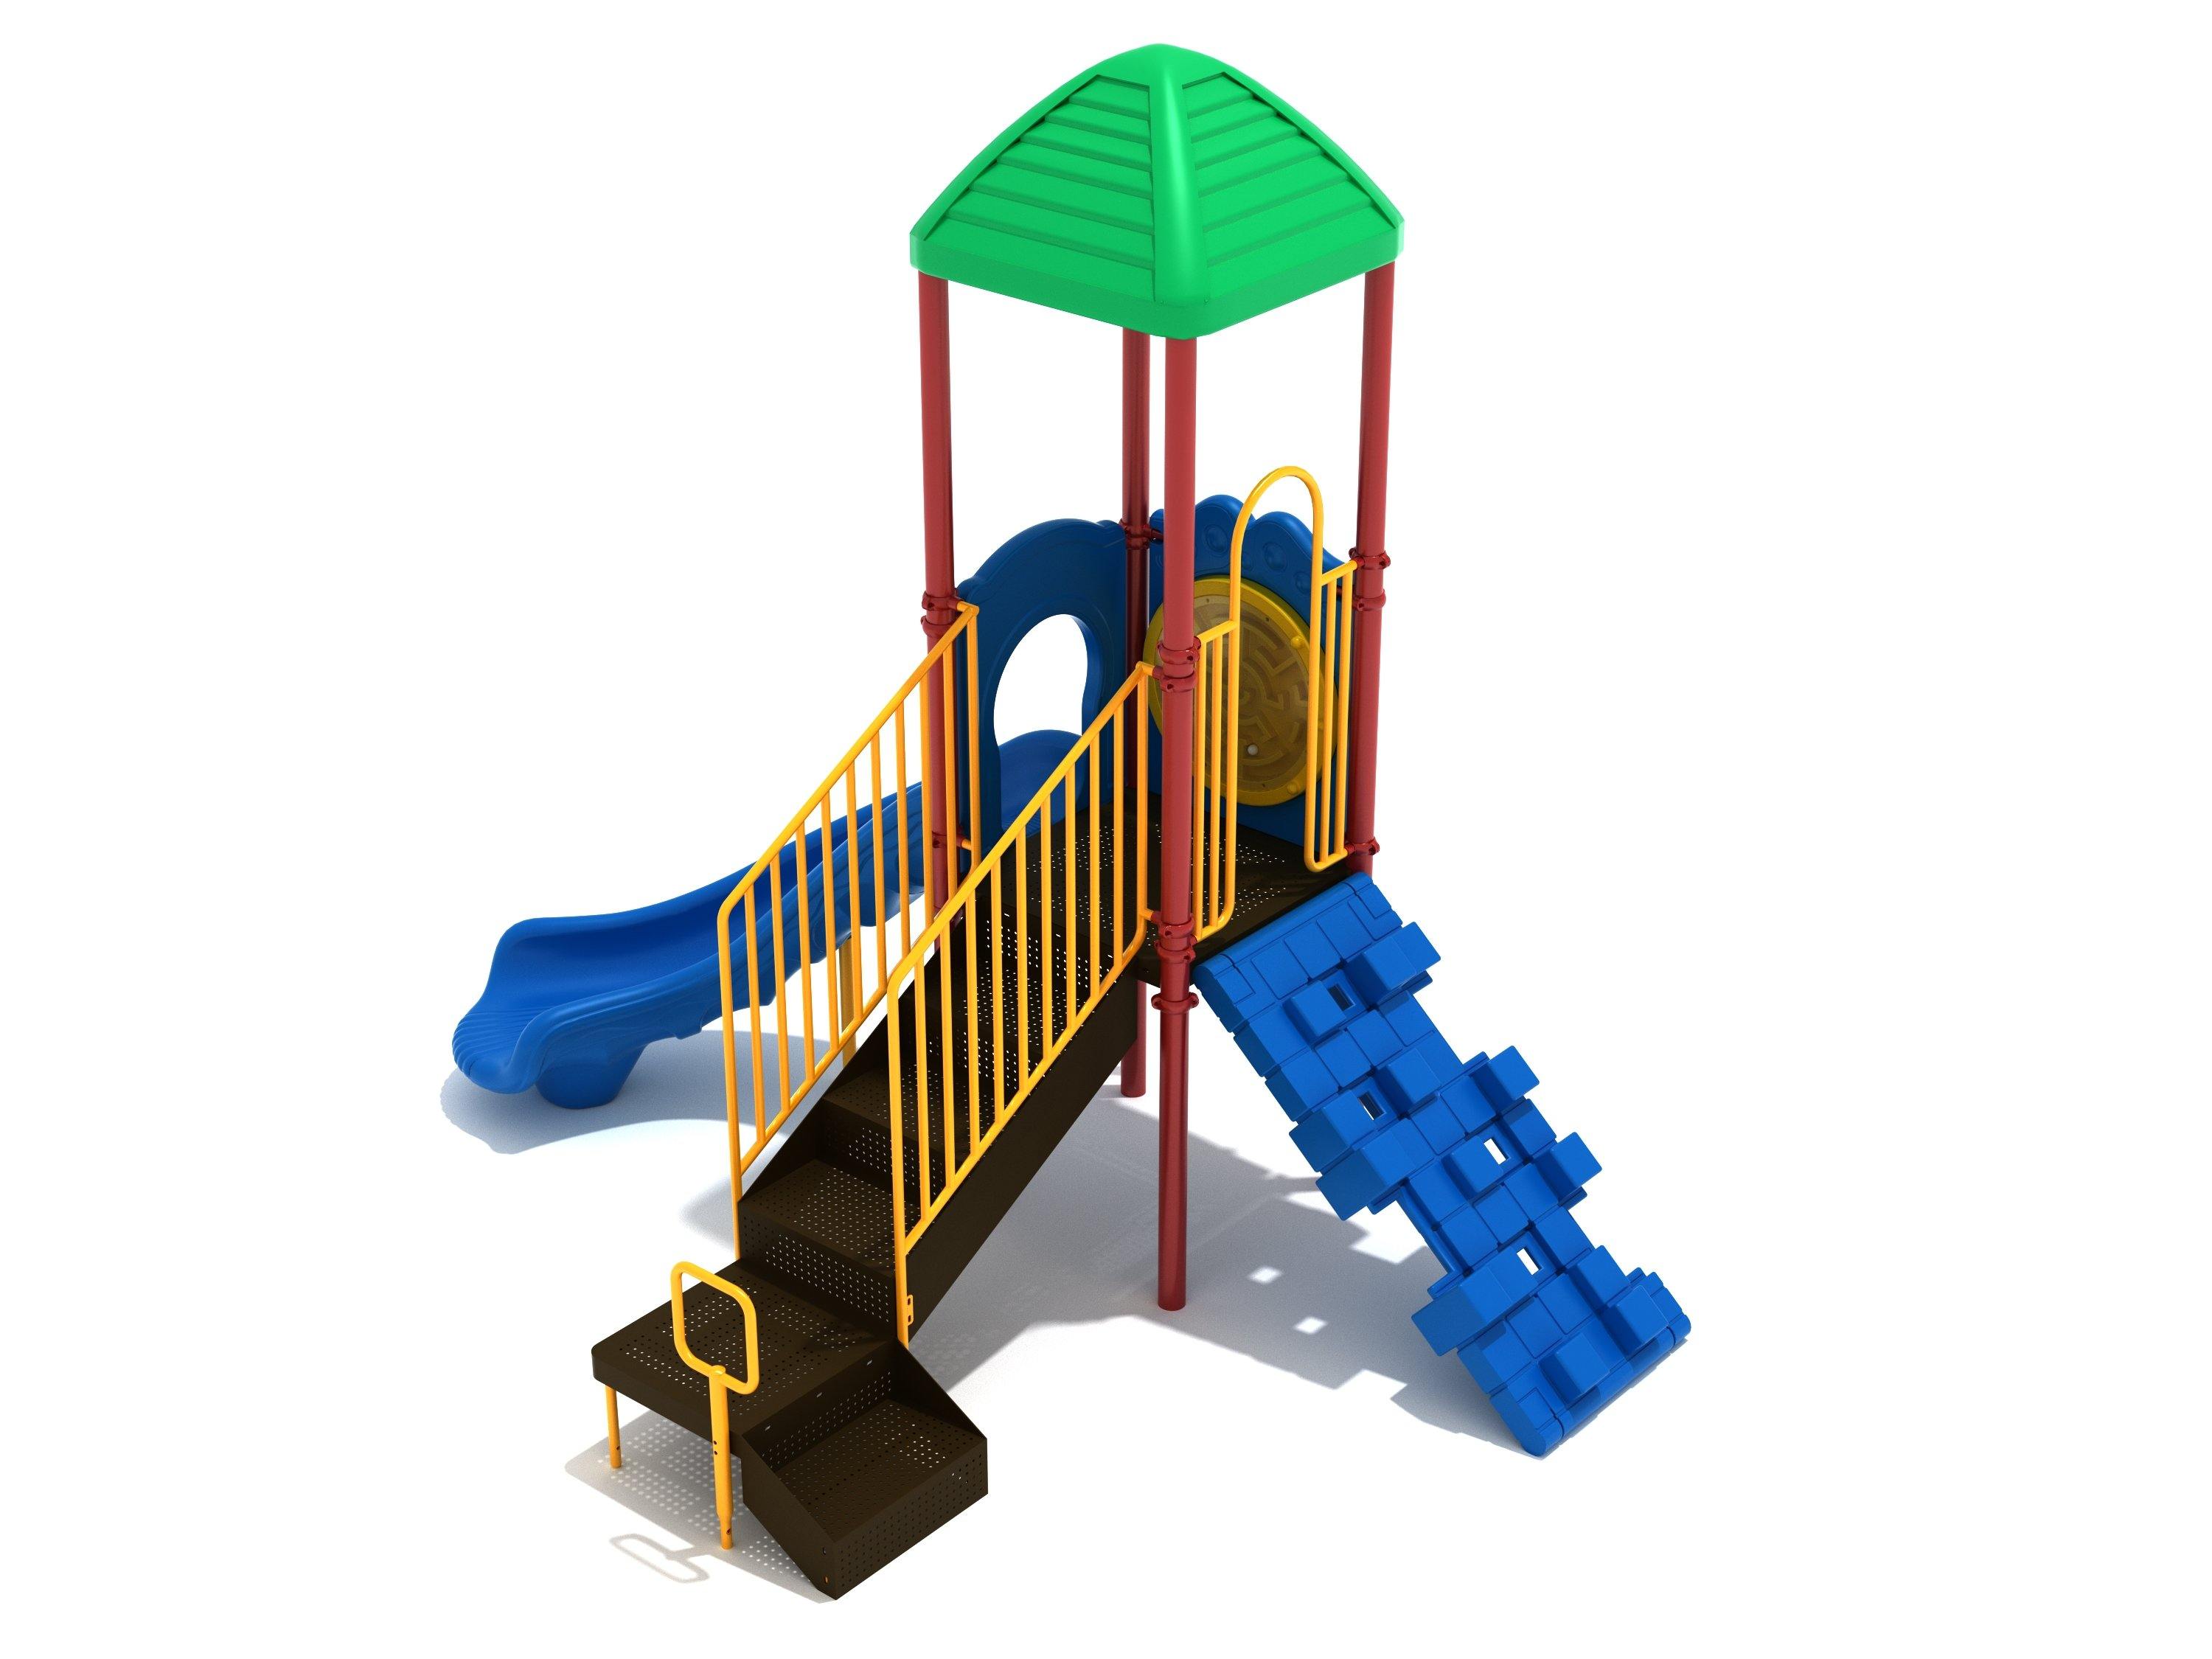 Eagle's Perch - River City Play Systems